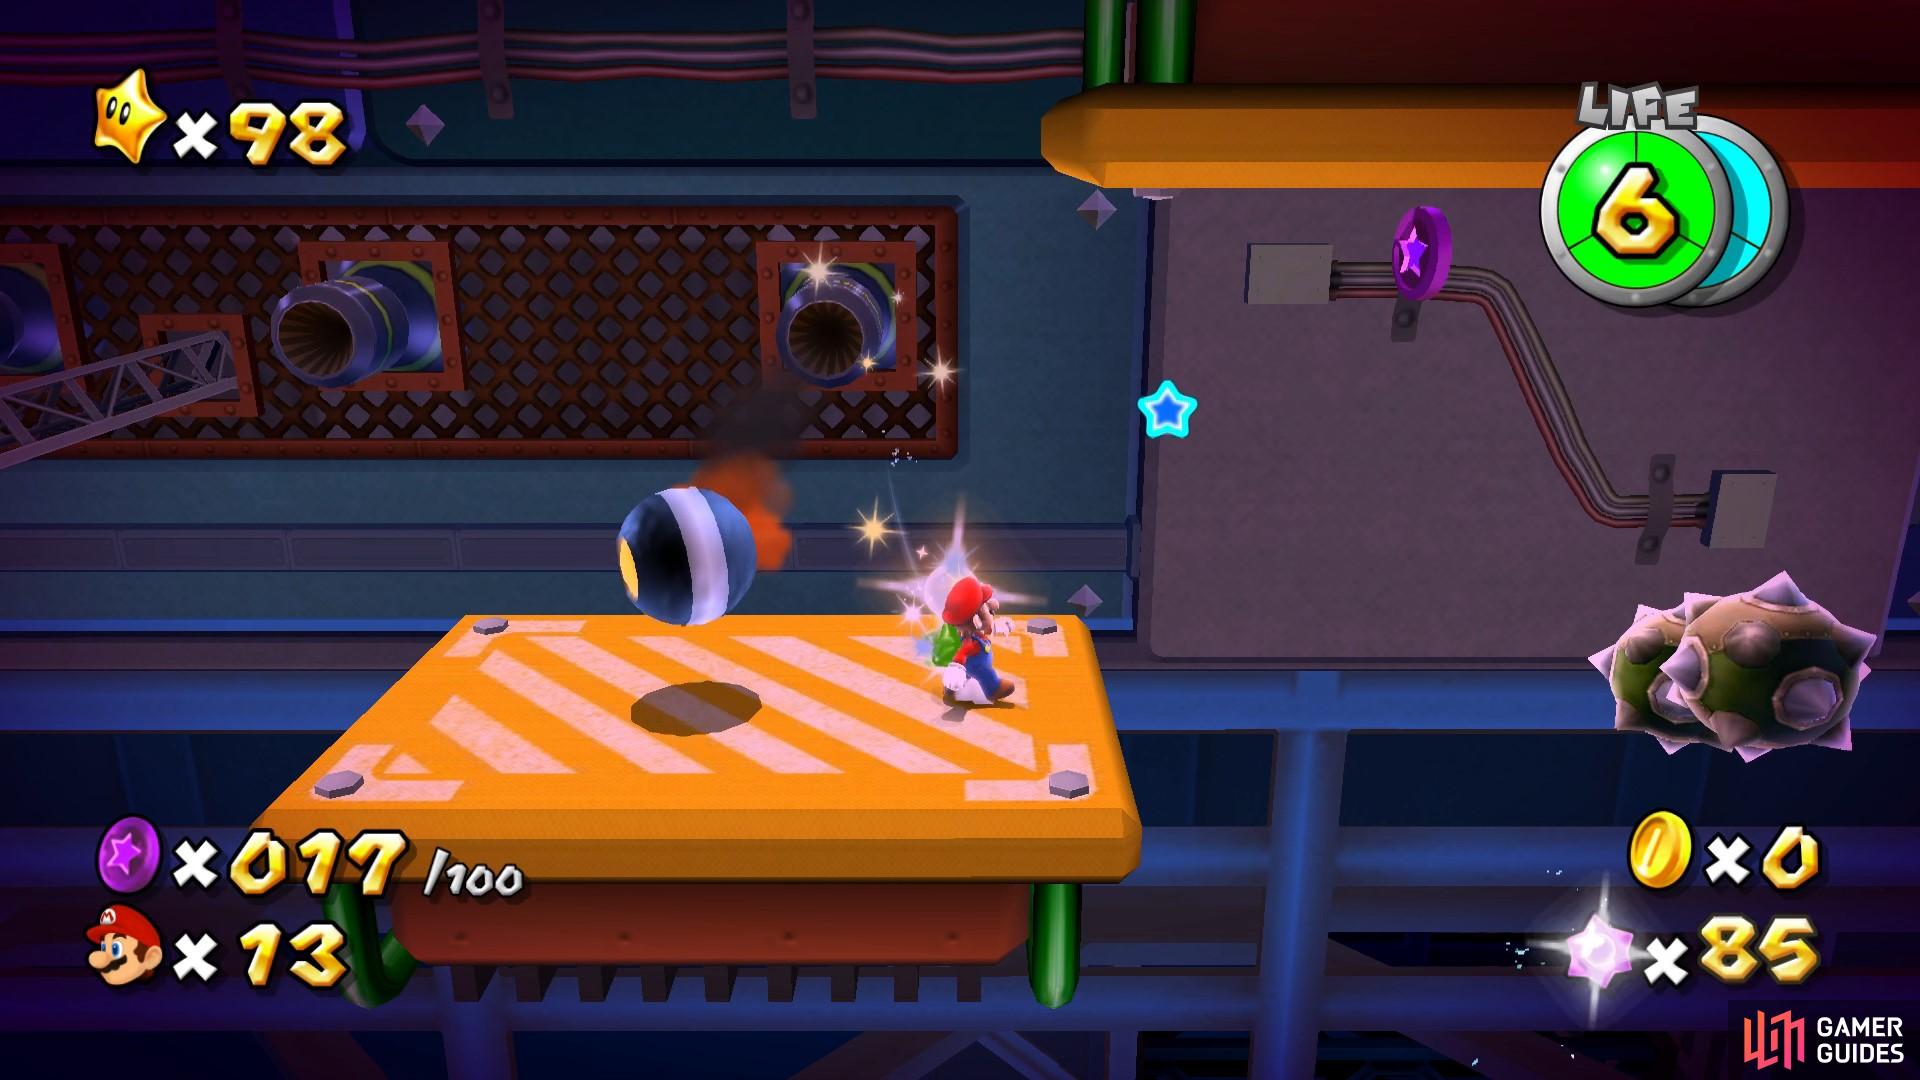 After grabbing the first 17 Purple Coins, you’ll need to jump up onto an upside down platform.